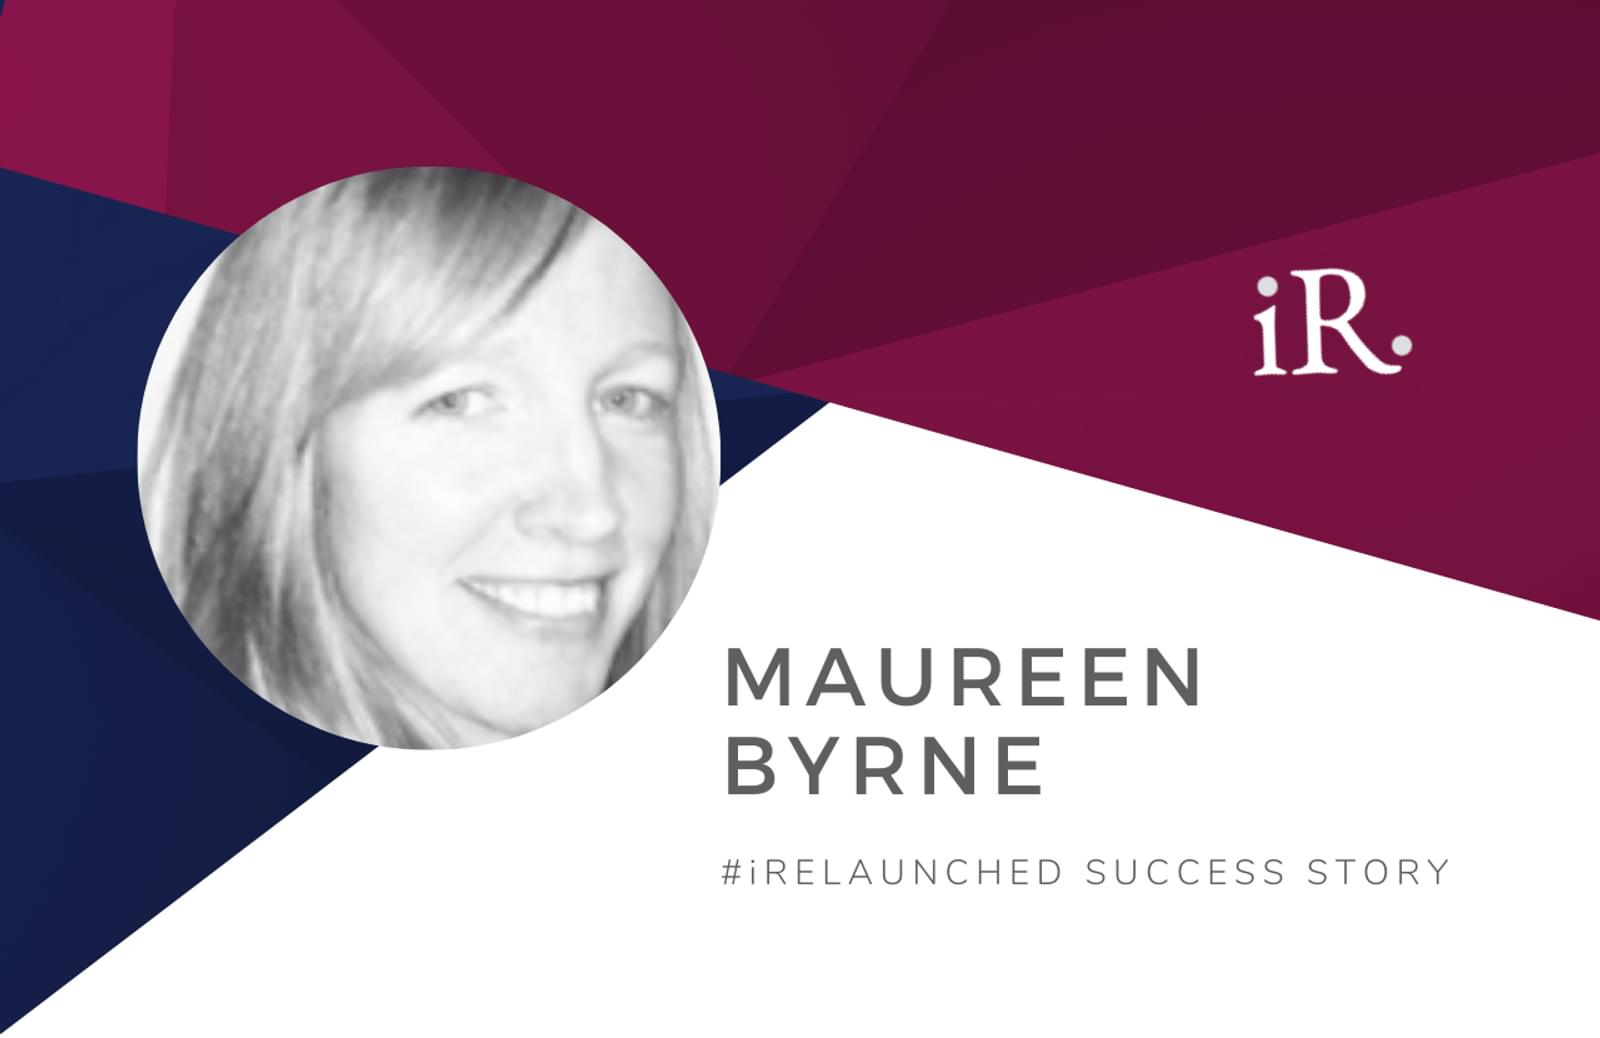 Maureen Byrne's headshot and the text #iRelaunched Success Story along with the iRelaunch logo.  A navy and maroon geometric textured background intersect behind Maureen's headshot.